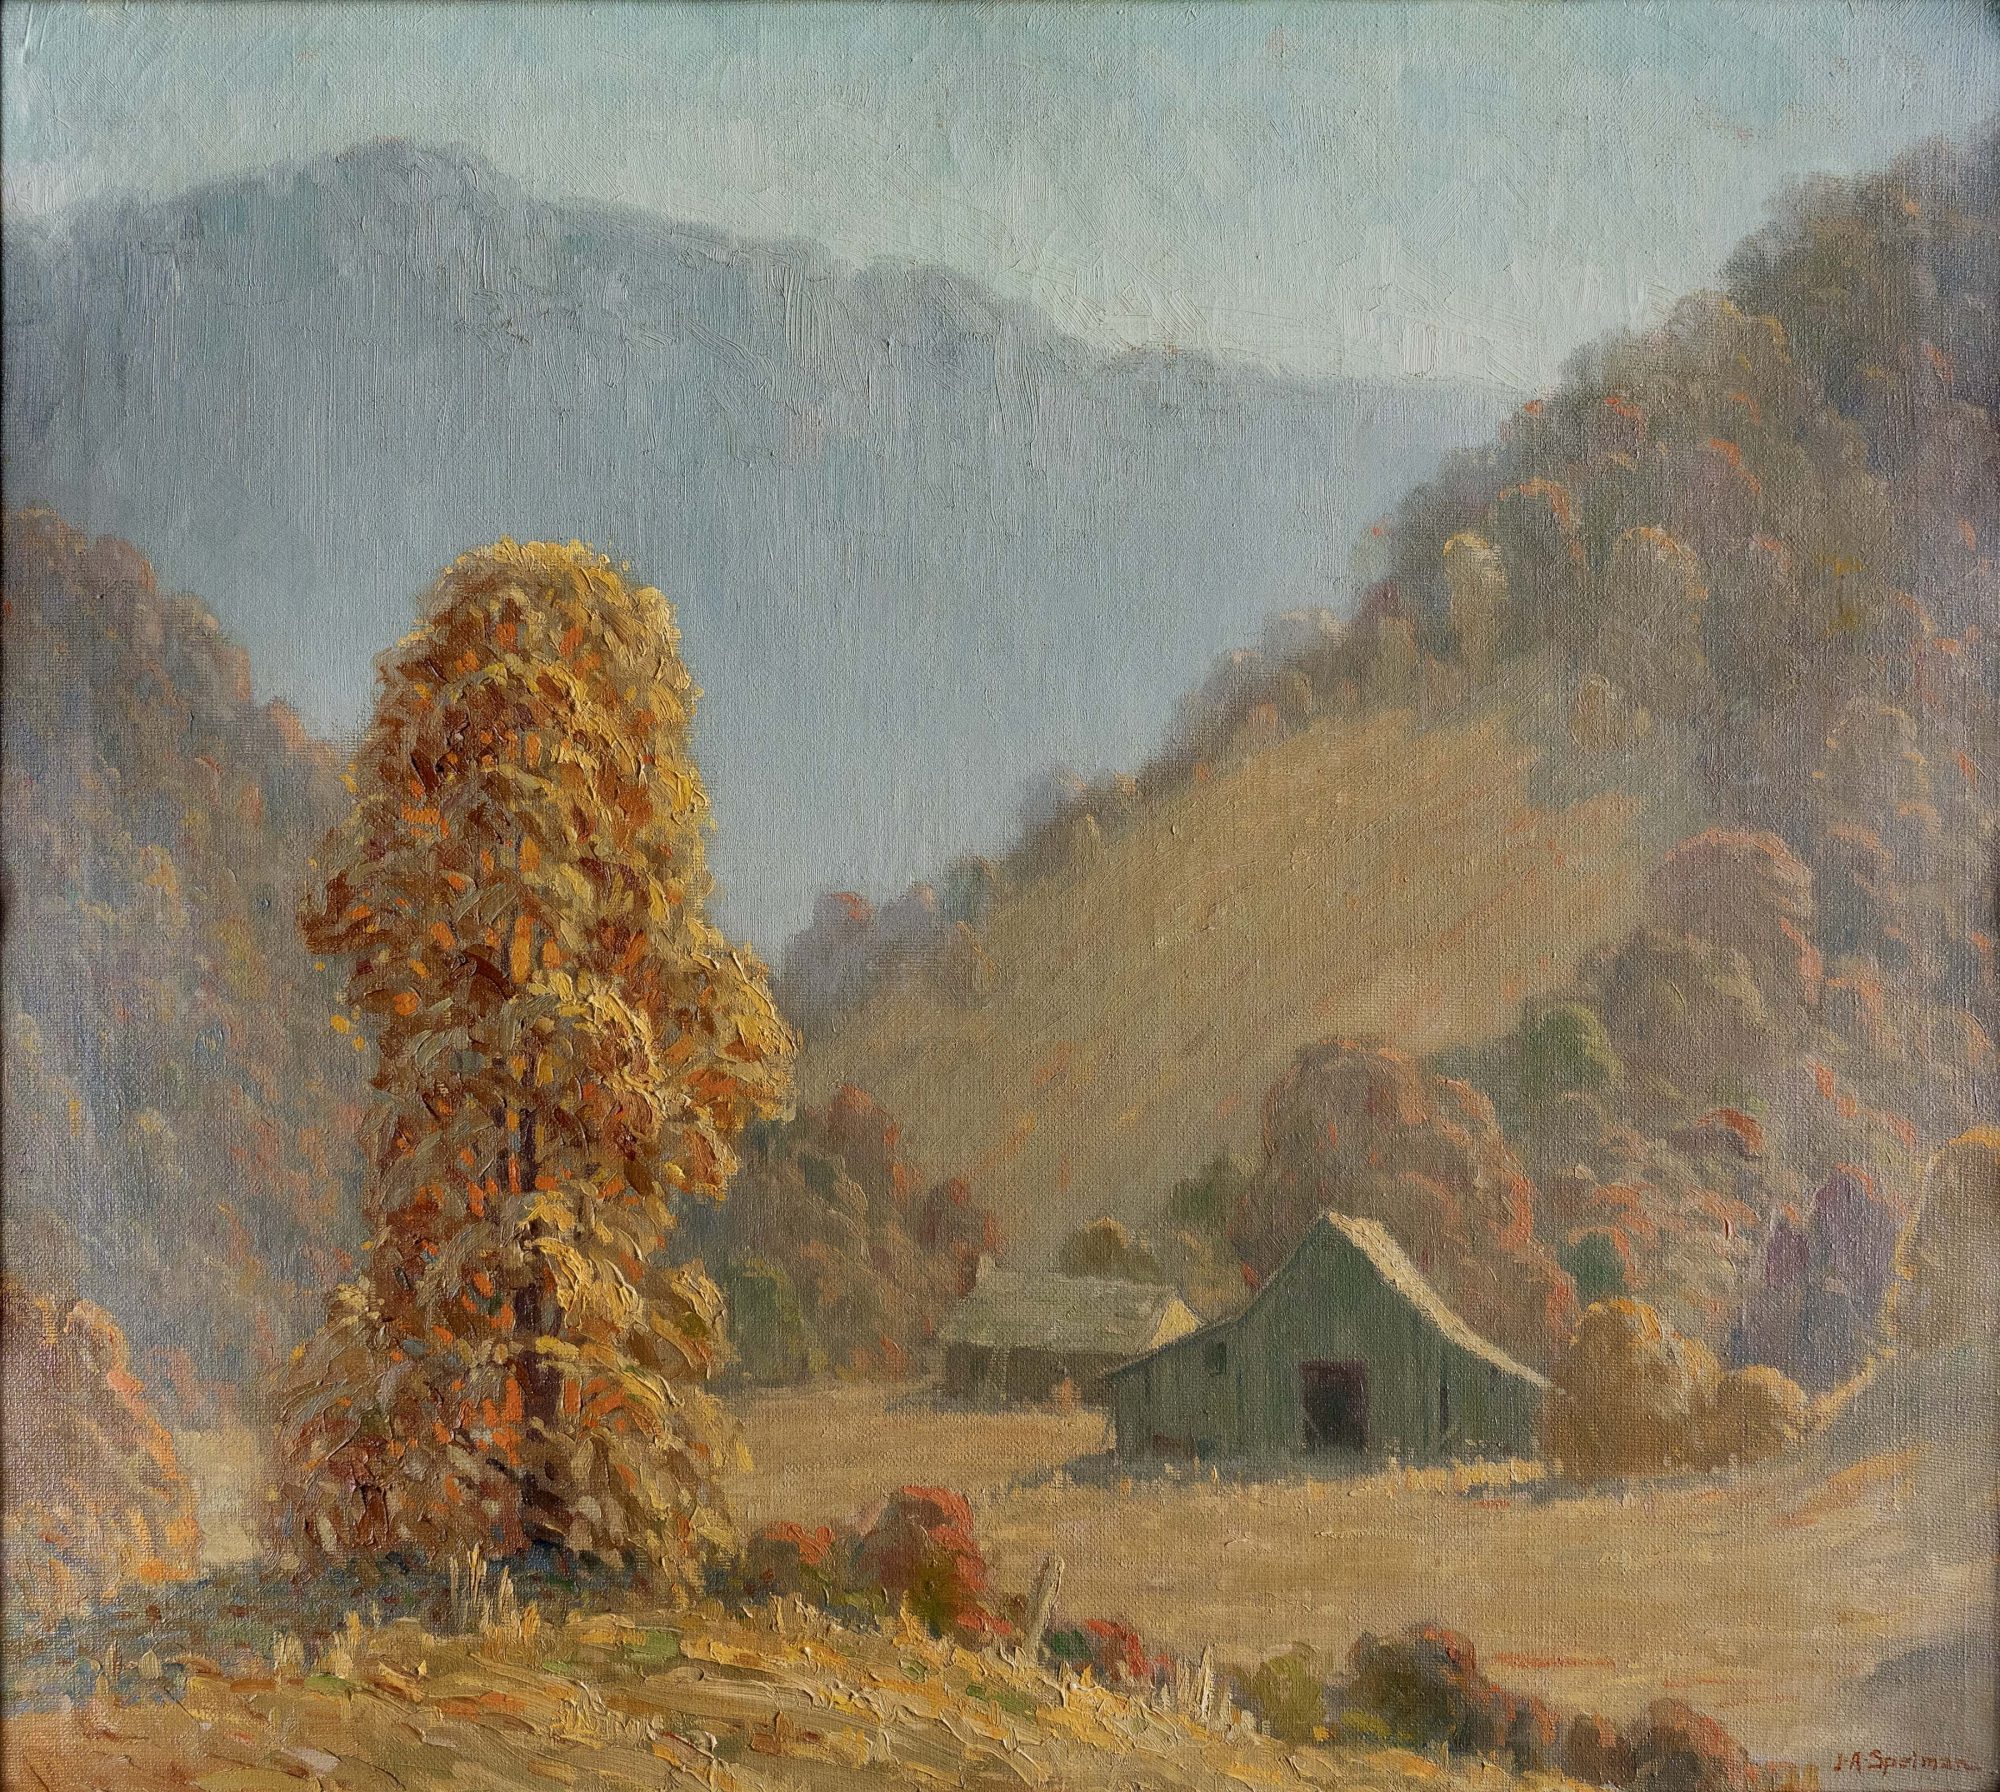 Honoring Nature: Early Southern Appalachian Landscape Painting